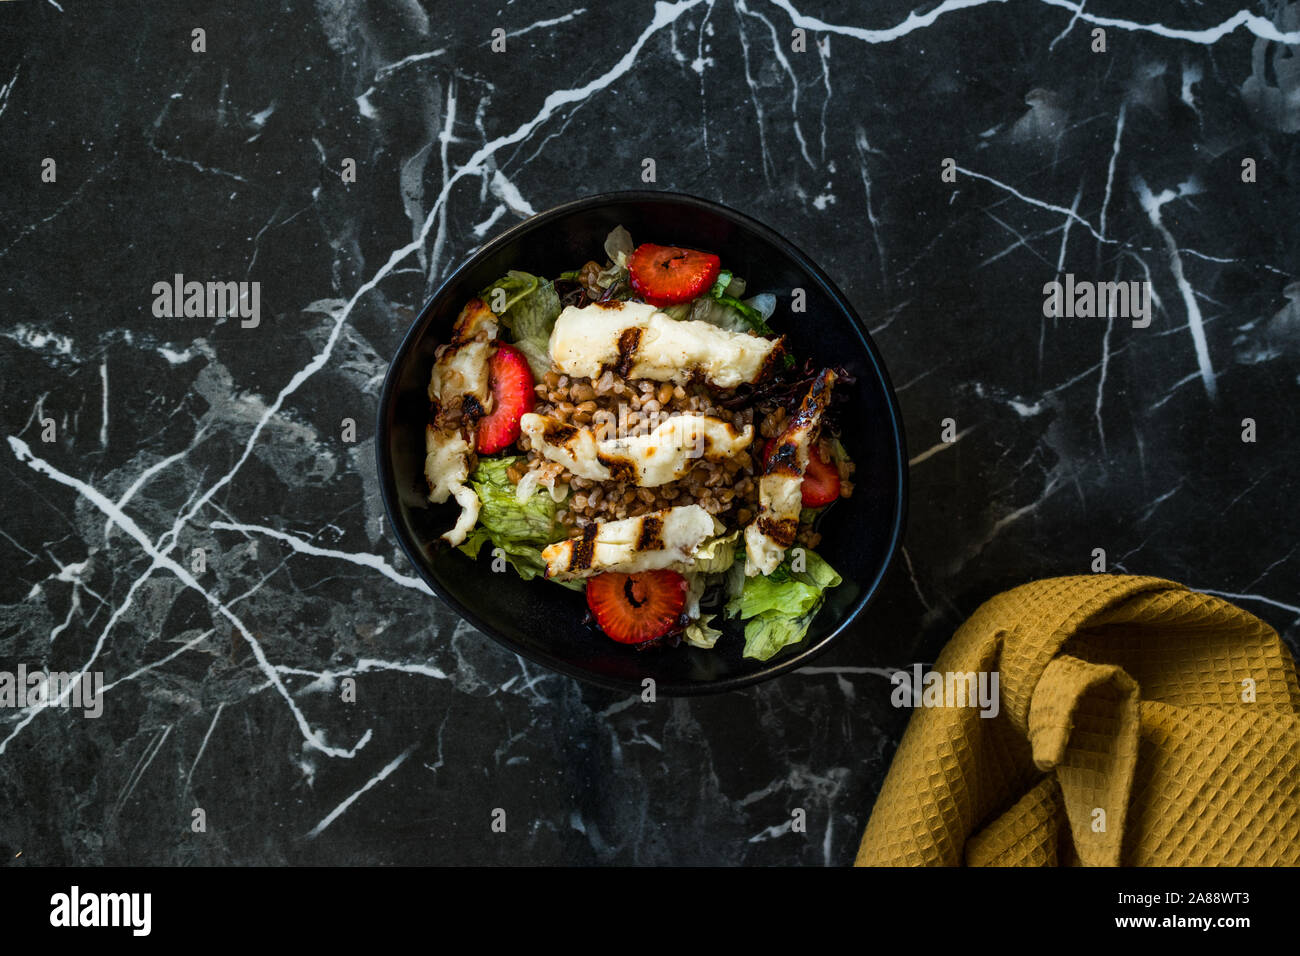 Grilled Halloumi Cheese Salad with Strawberry Slices and Buckwheat / Hellim in Black Bowl on Dark Granite Surface. Organic Fresh Food. Stock Photo